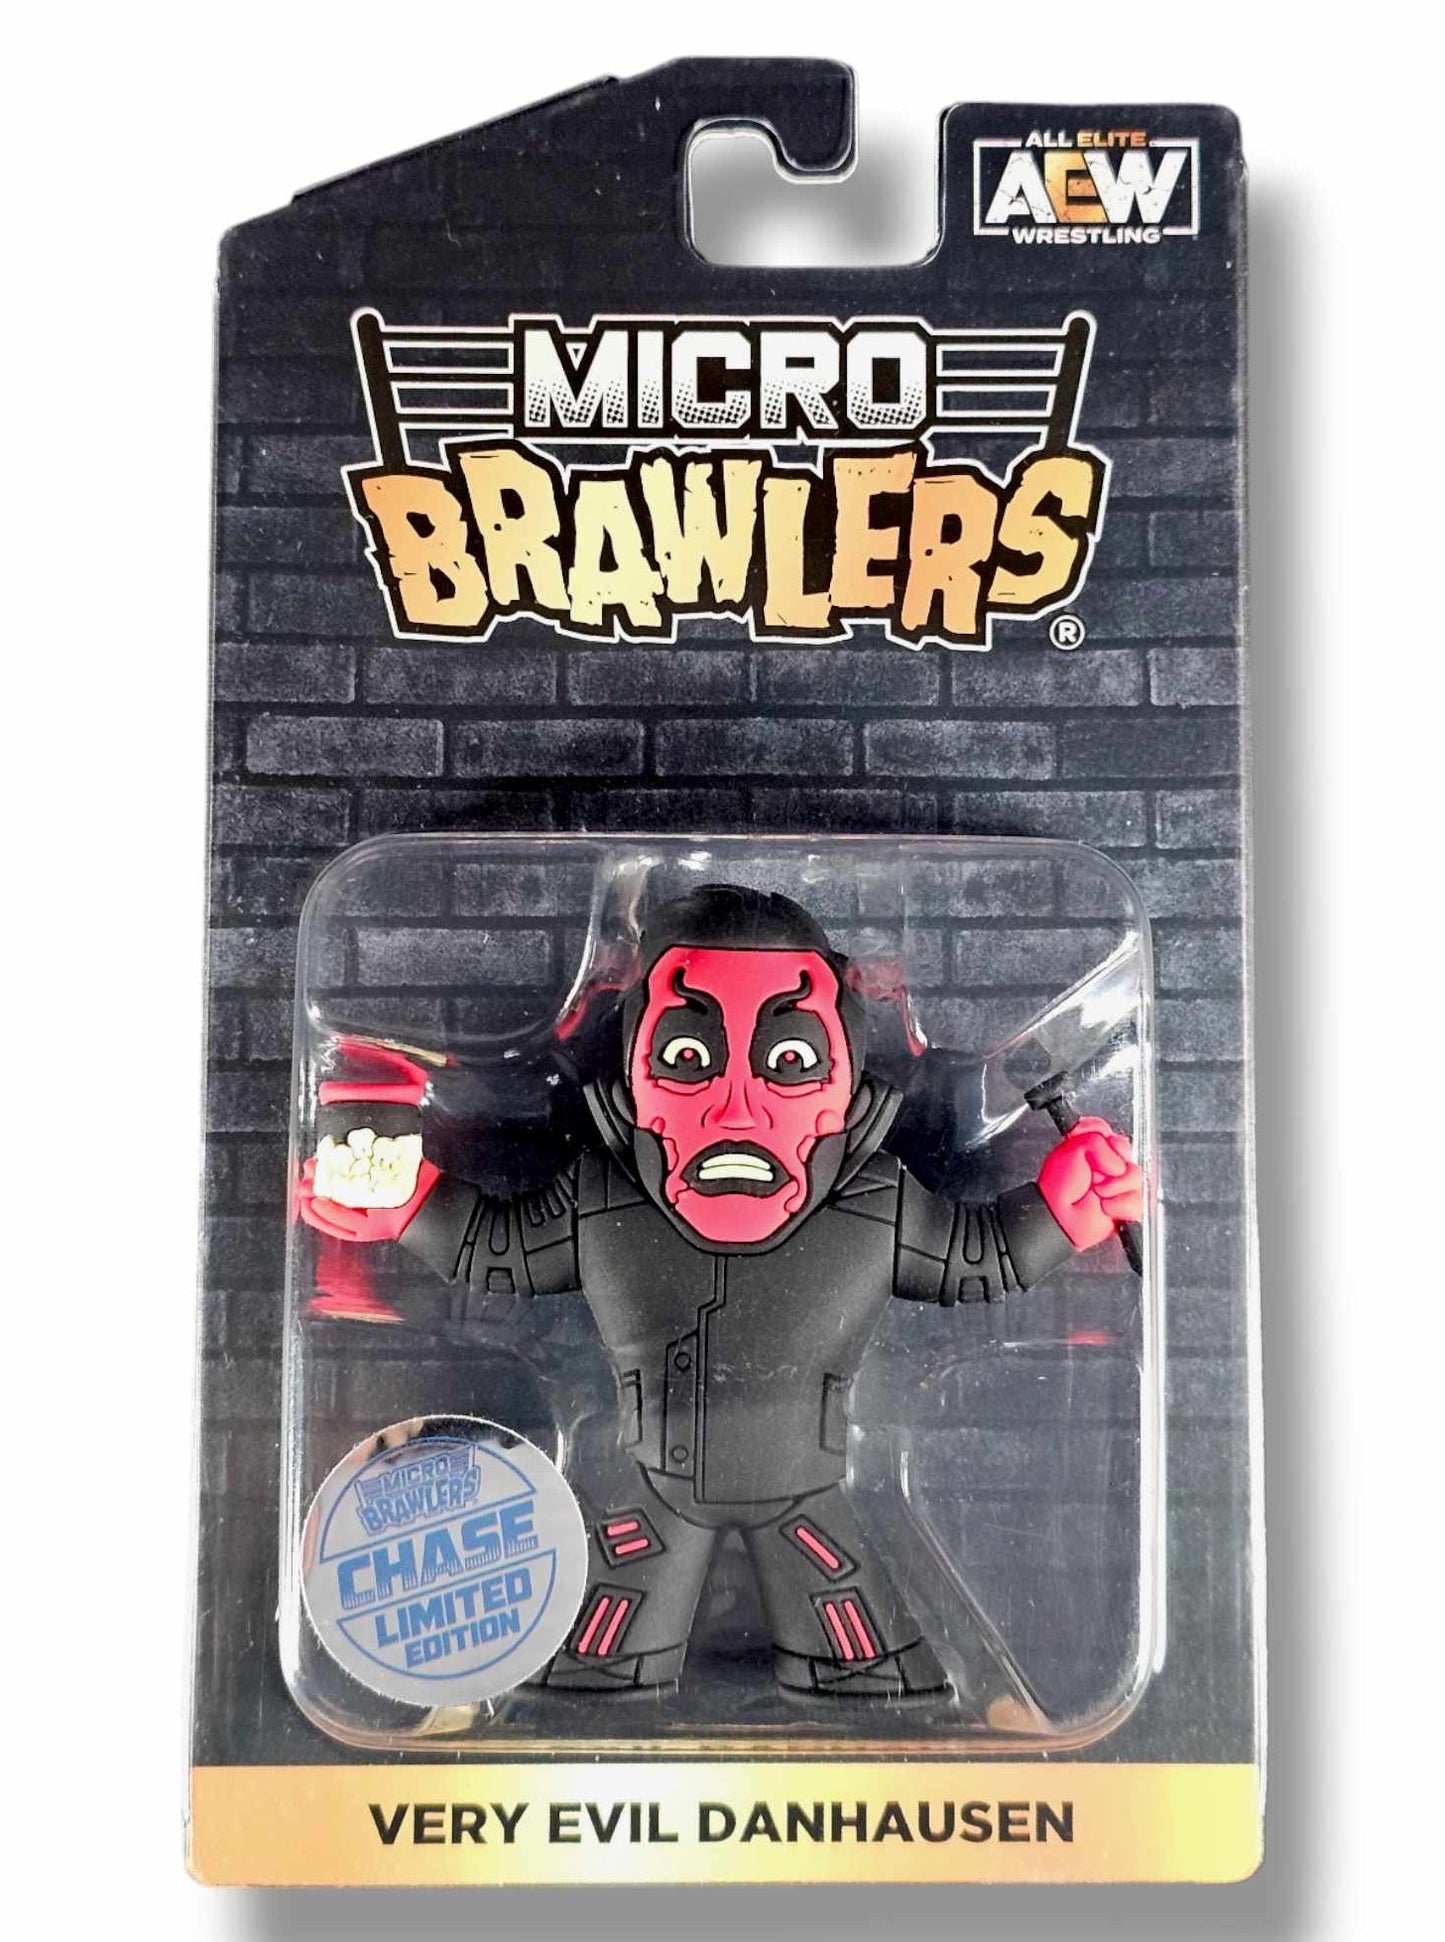 Micro Brawler I.R.S. Limited Edition Chase- PW Crate CHASE